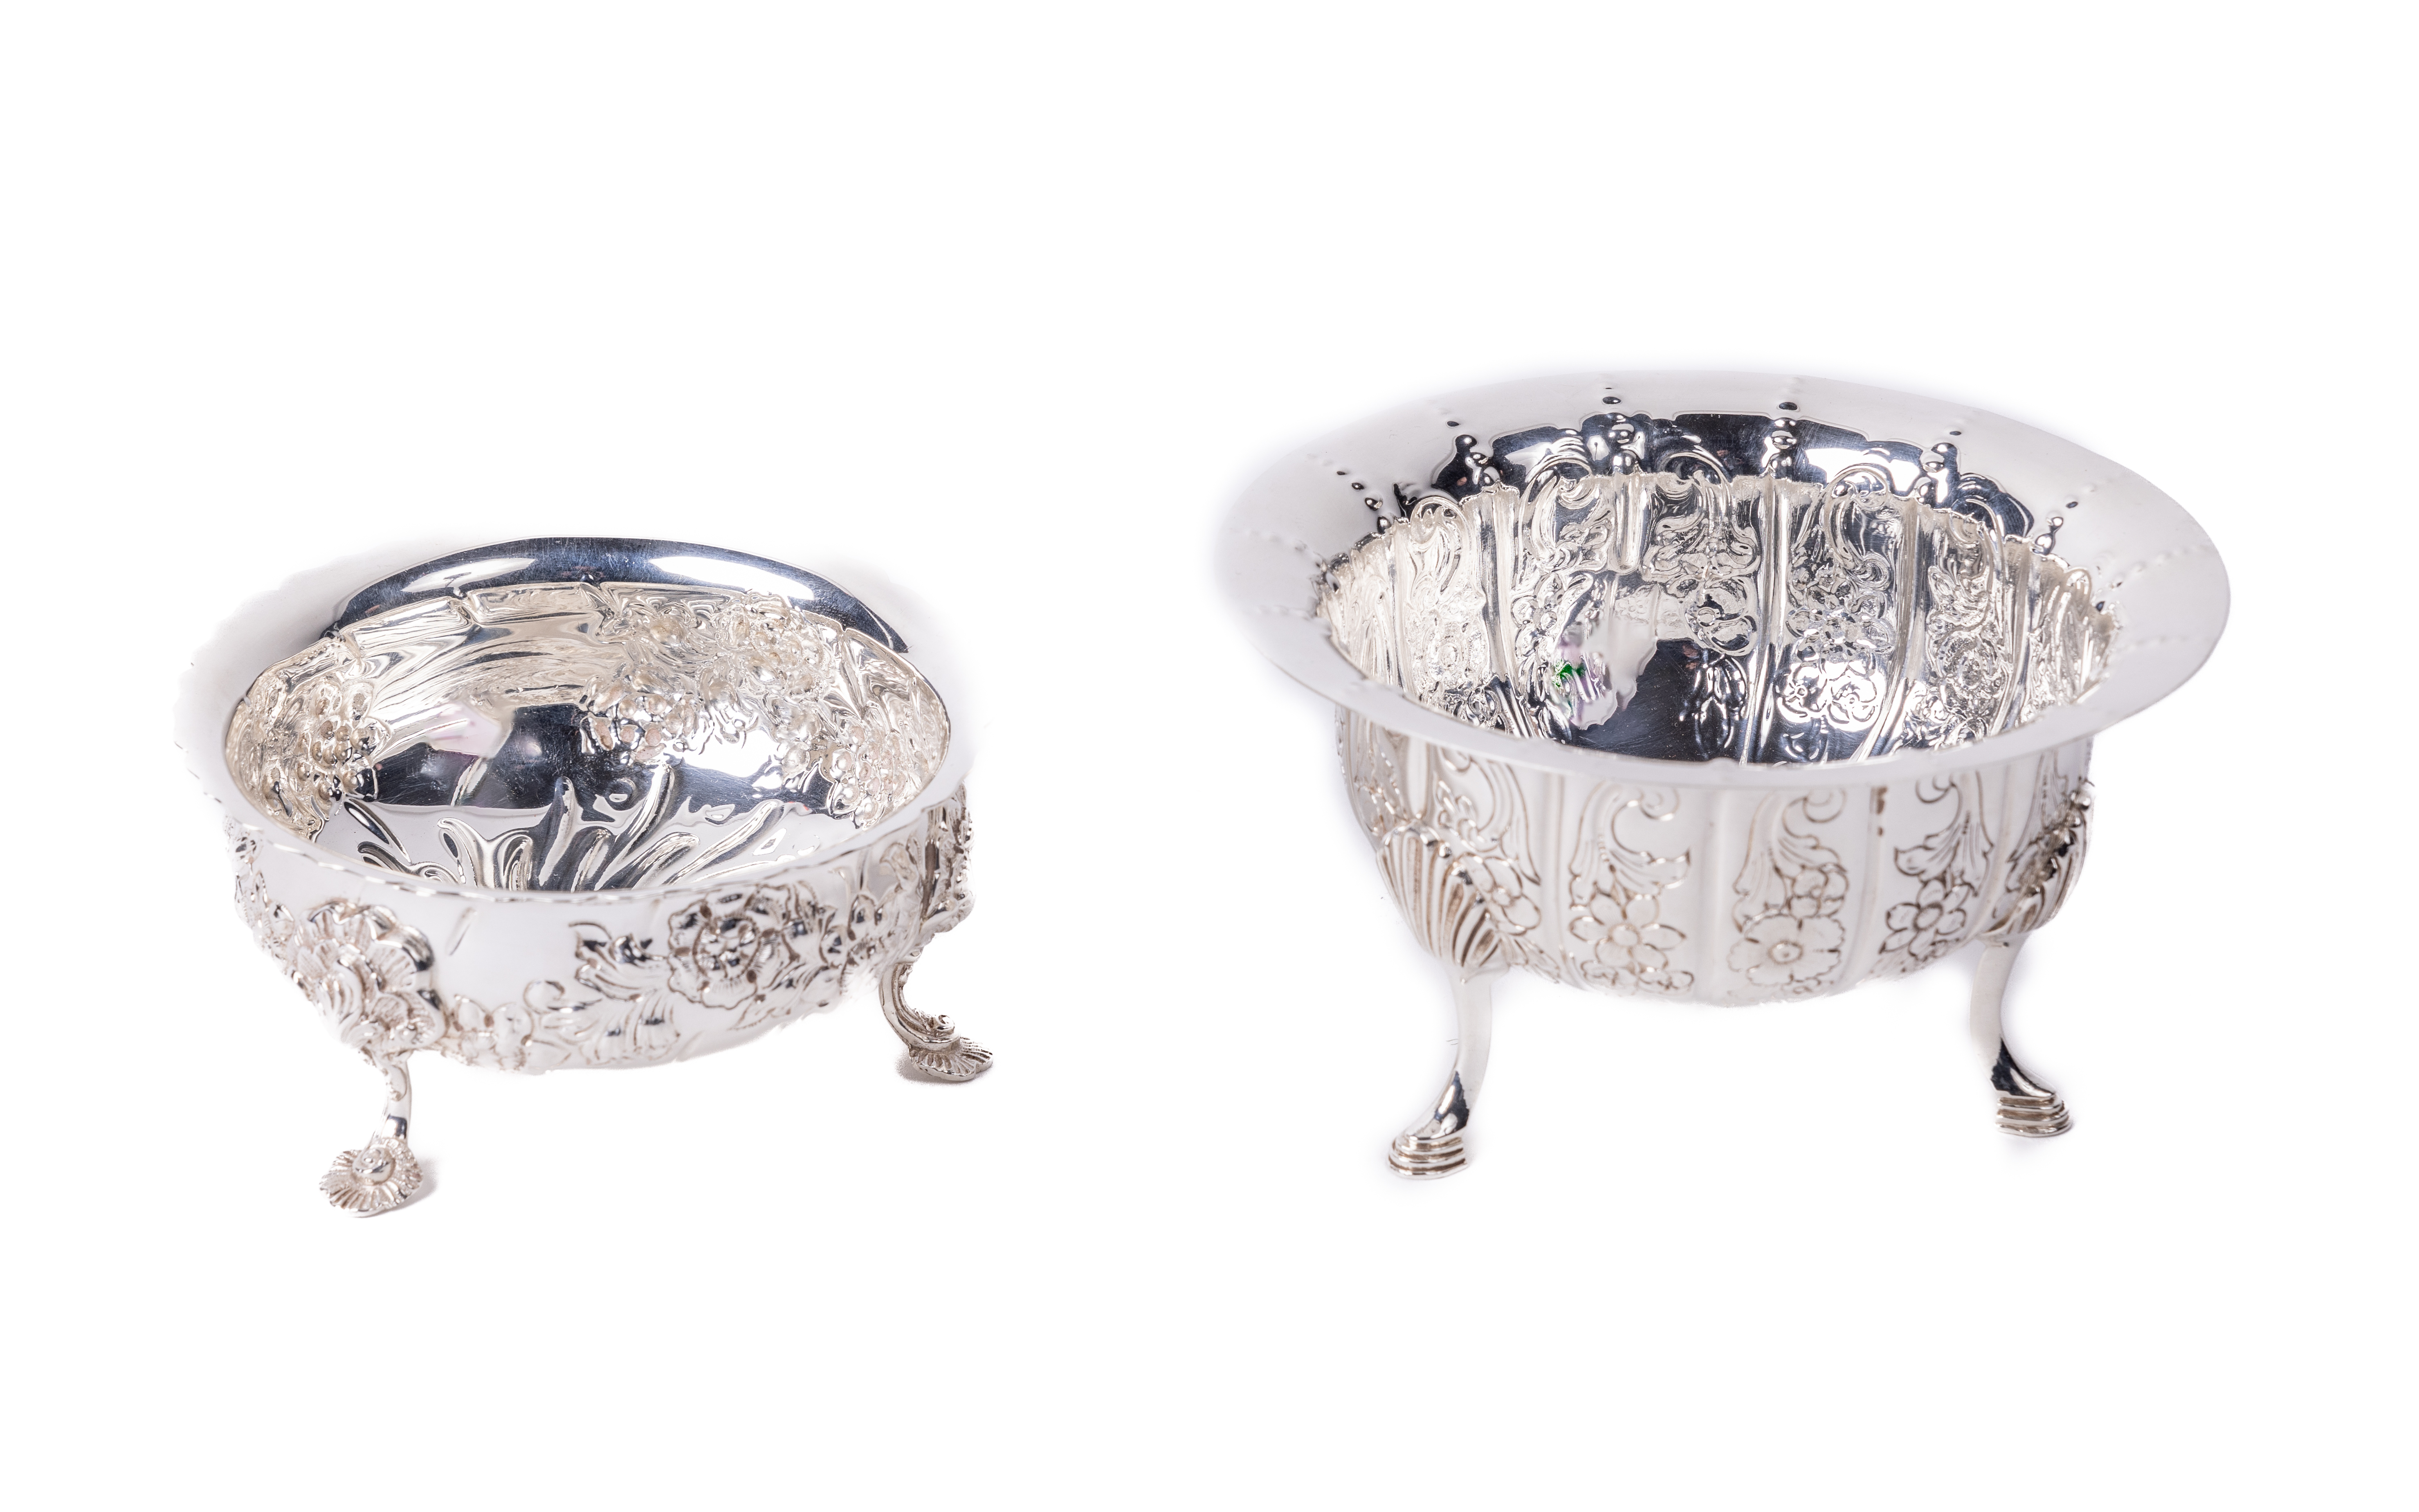 A Georgian style silver repousse decorated Sugar Bowl, by Royal Irish, with floral design, on